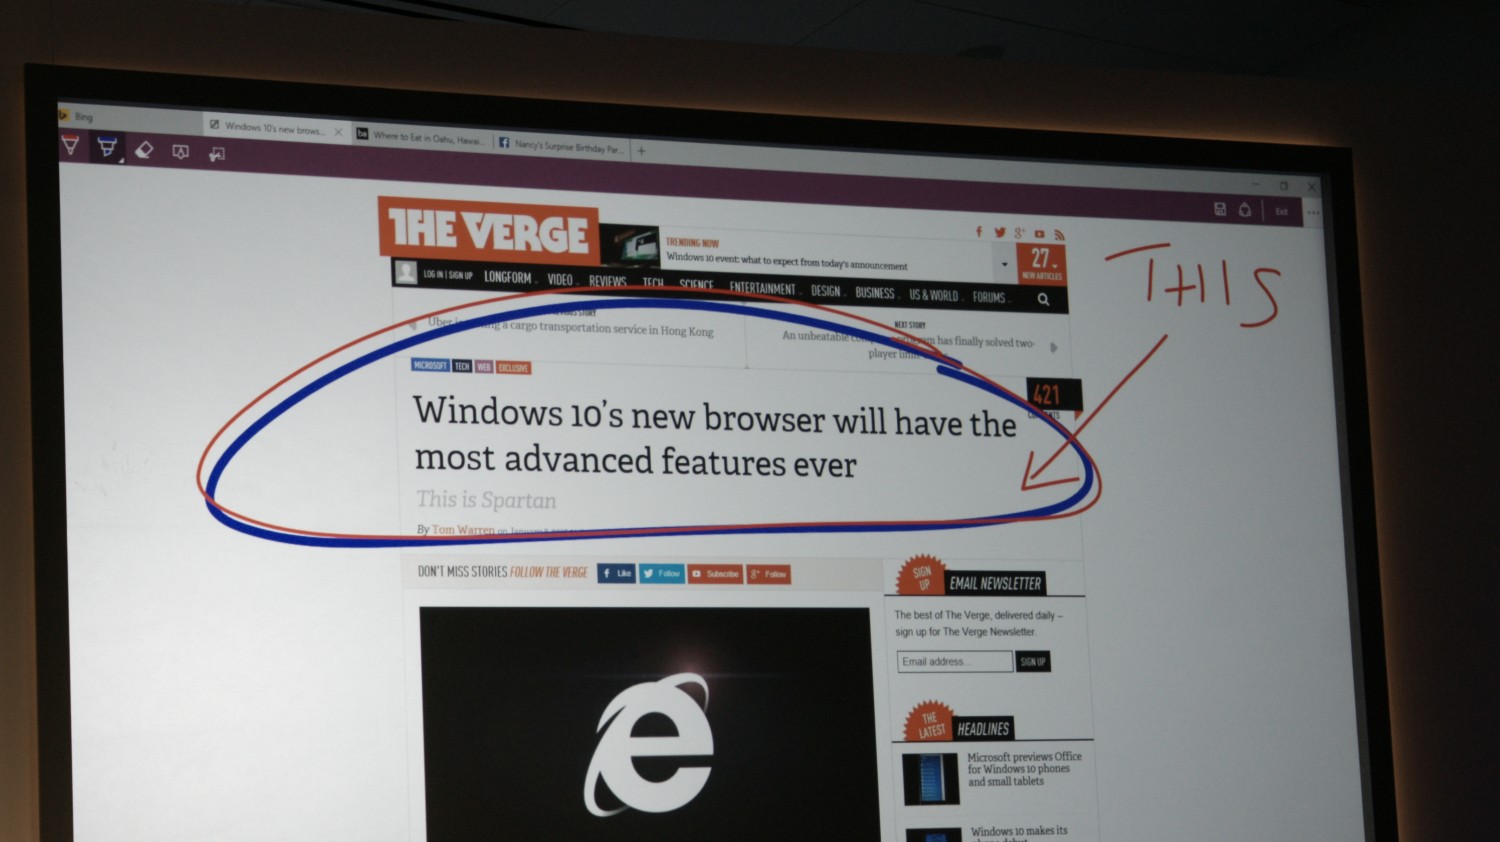 Windows 10 0121 354 This is Spartan, Microsofts new browser to challenge Google Chrome